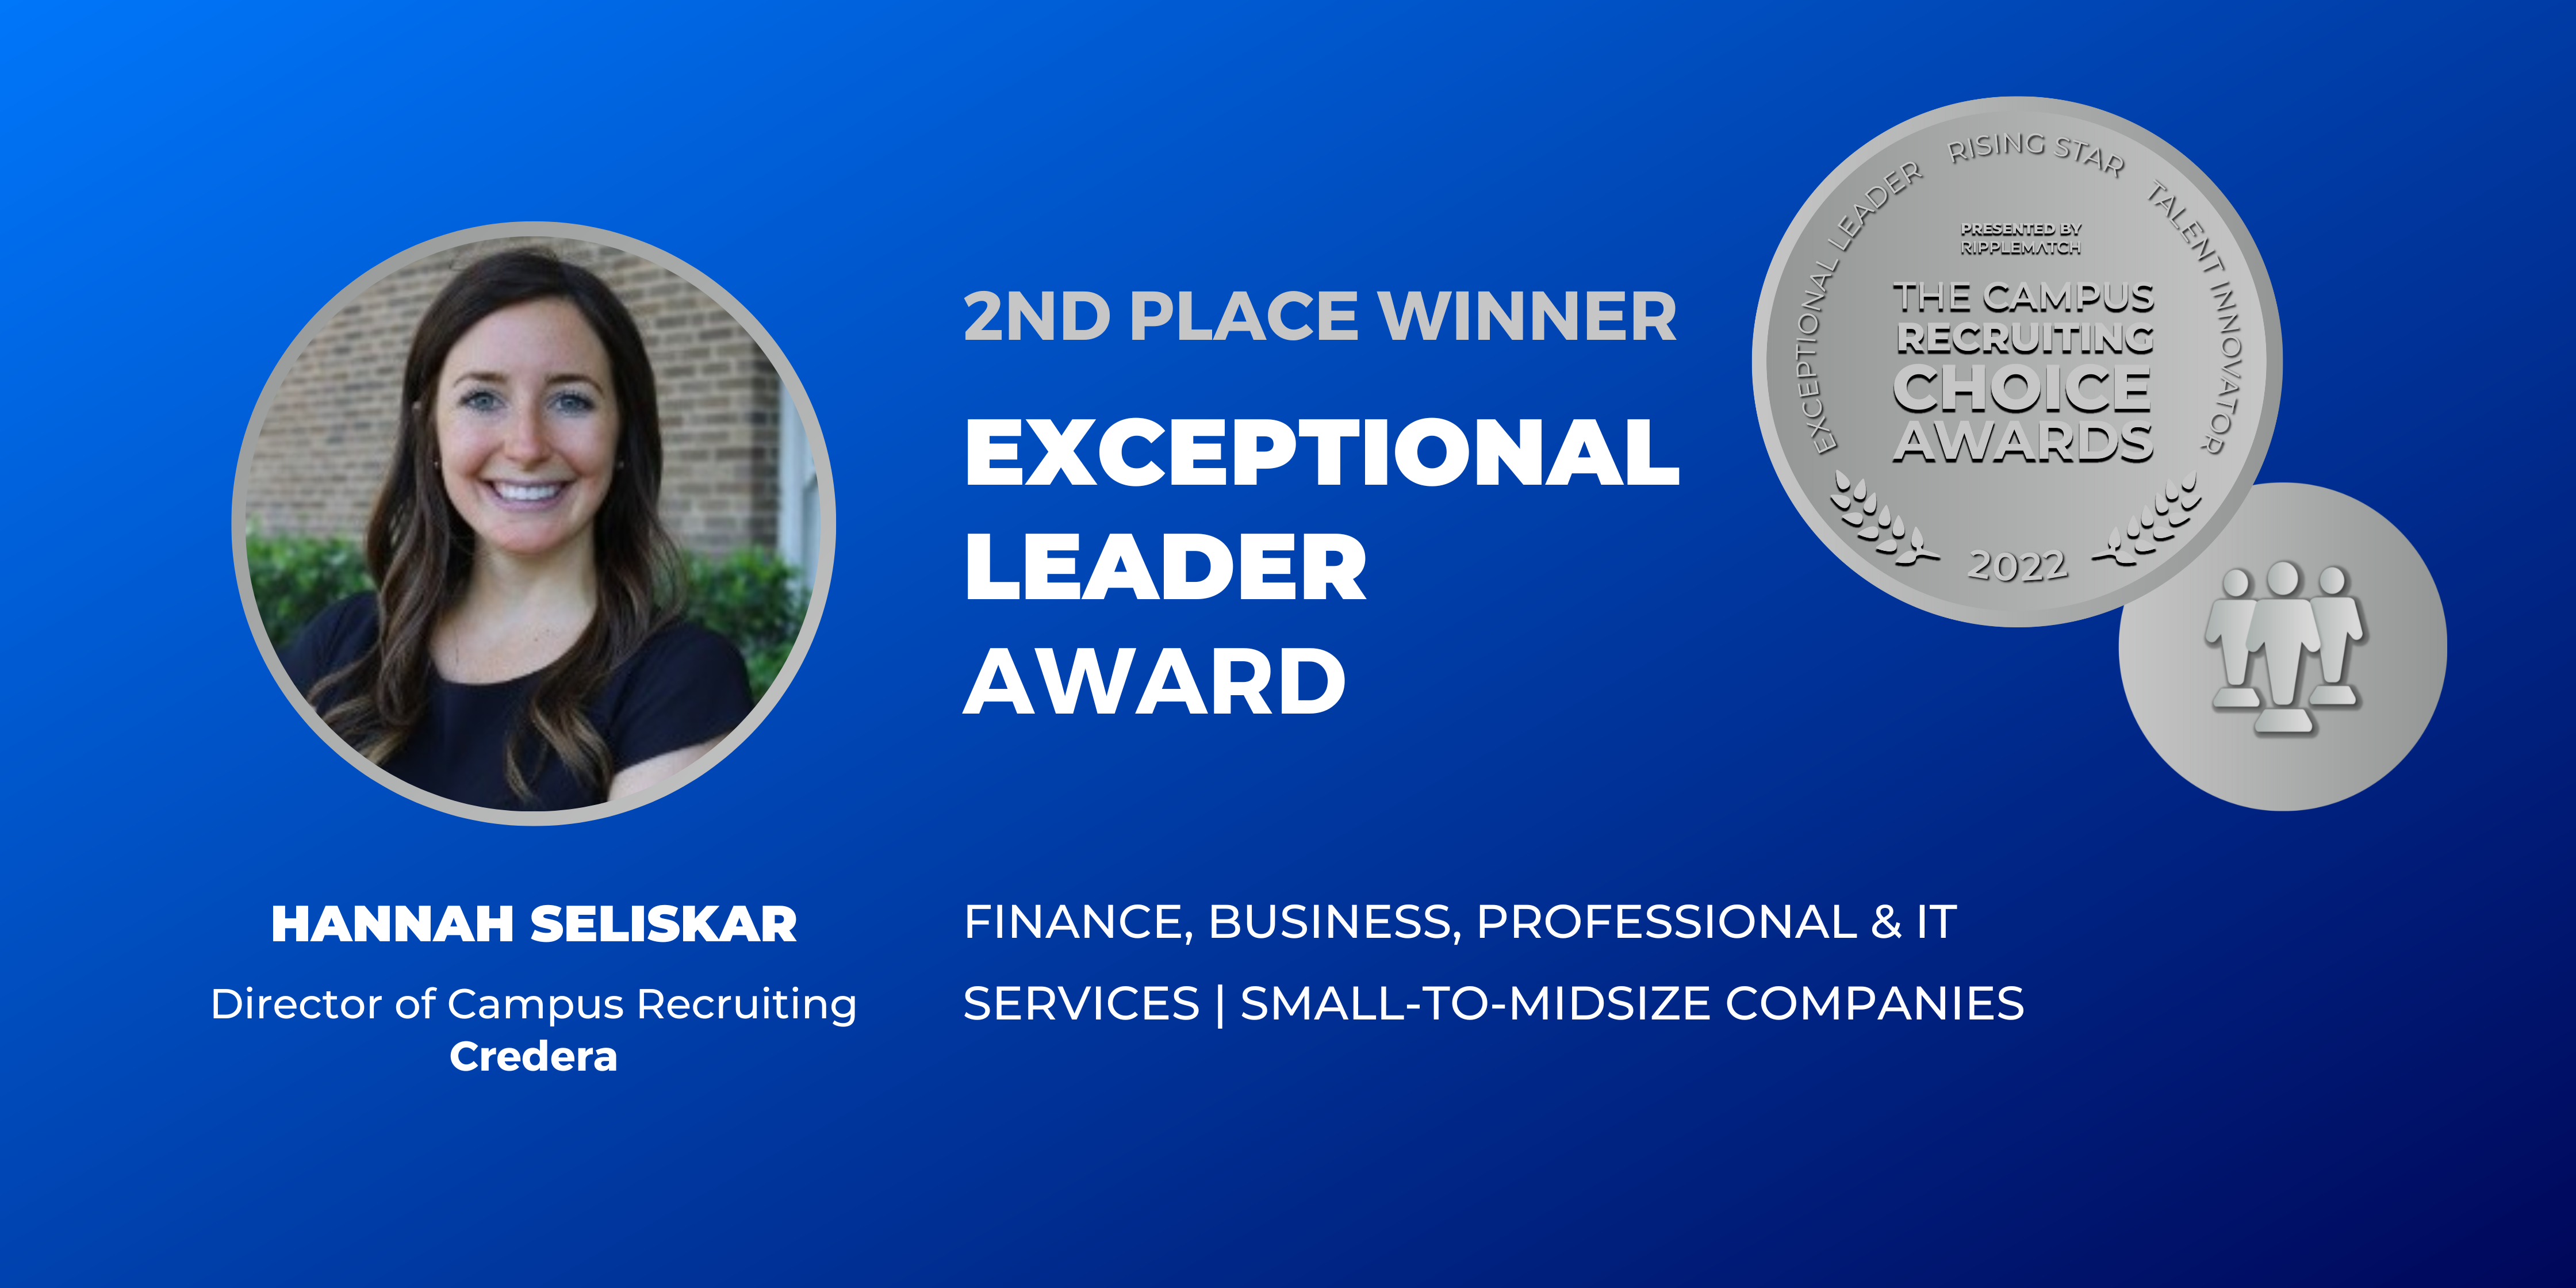 EXCEPTIONAL LEADER - 2nd place - Finance, Business, Professional & IT Services _ Small-to-Midsize Companies - Hannah Seliskar